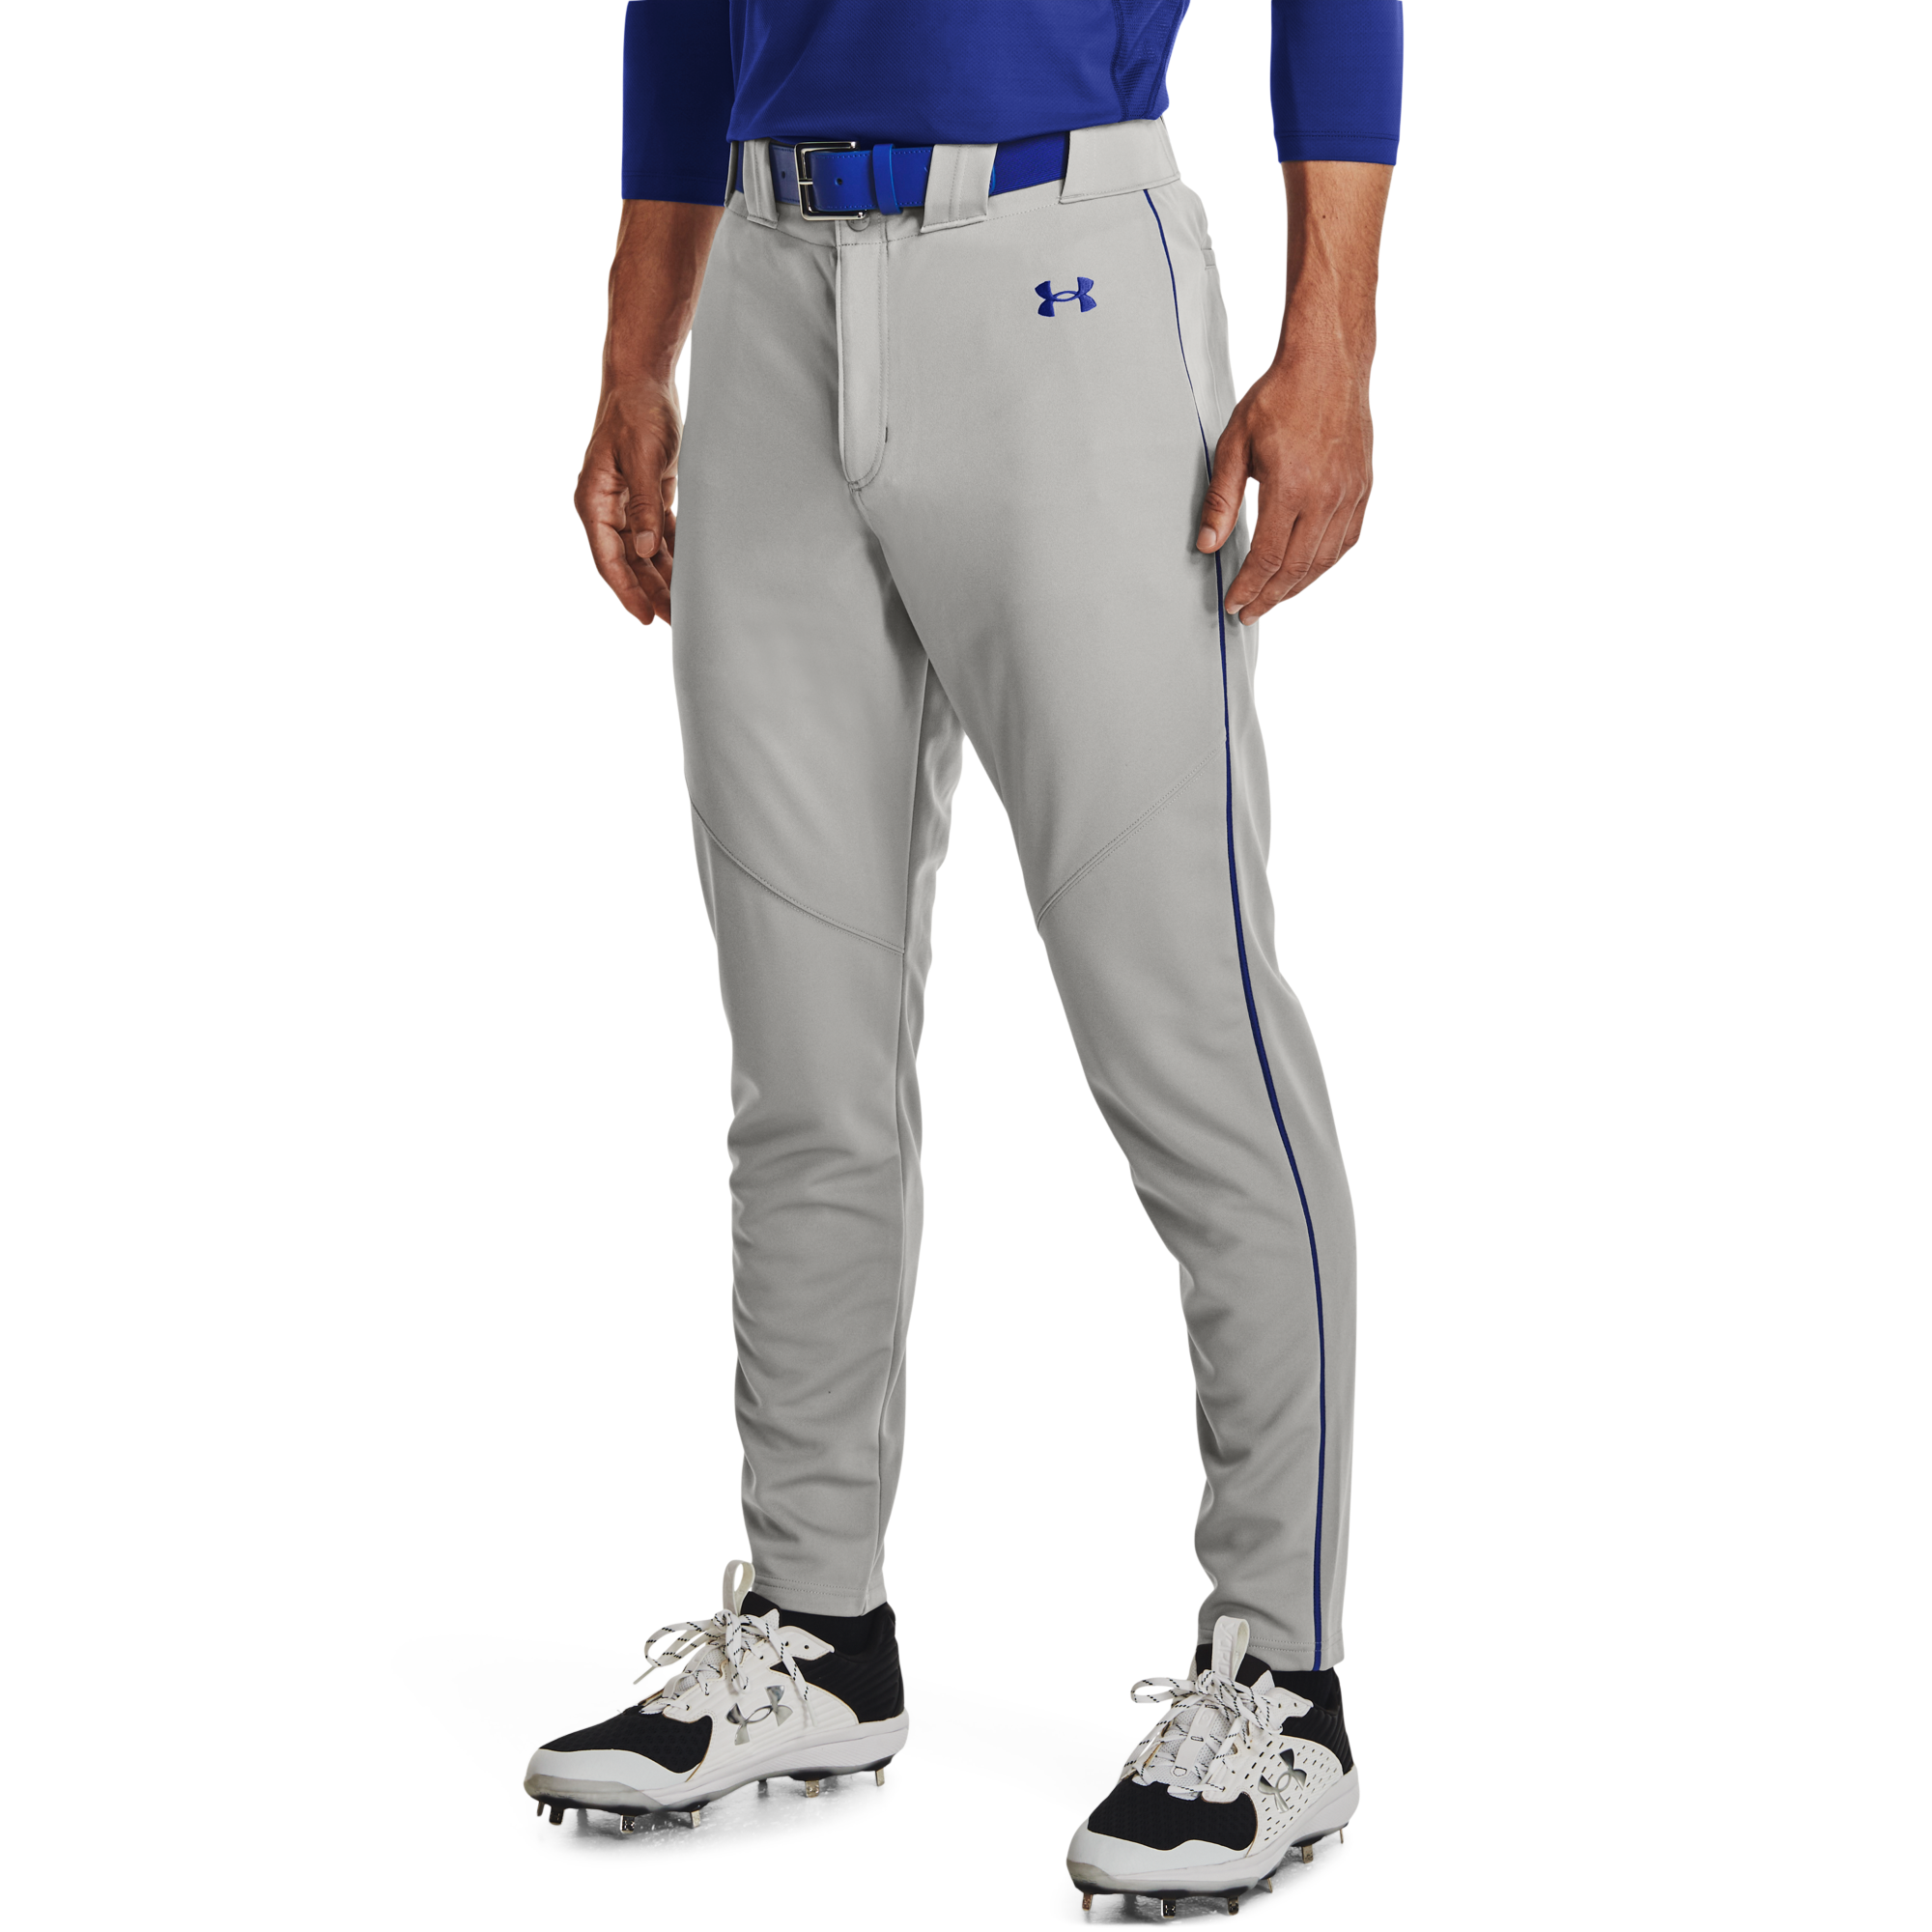 Under Armour Utility Baseball Piped Pant 22 Champs Sports